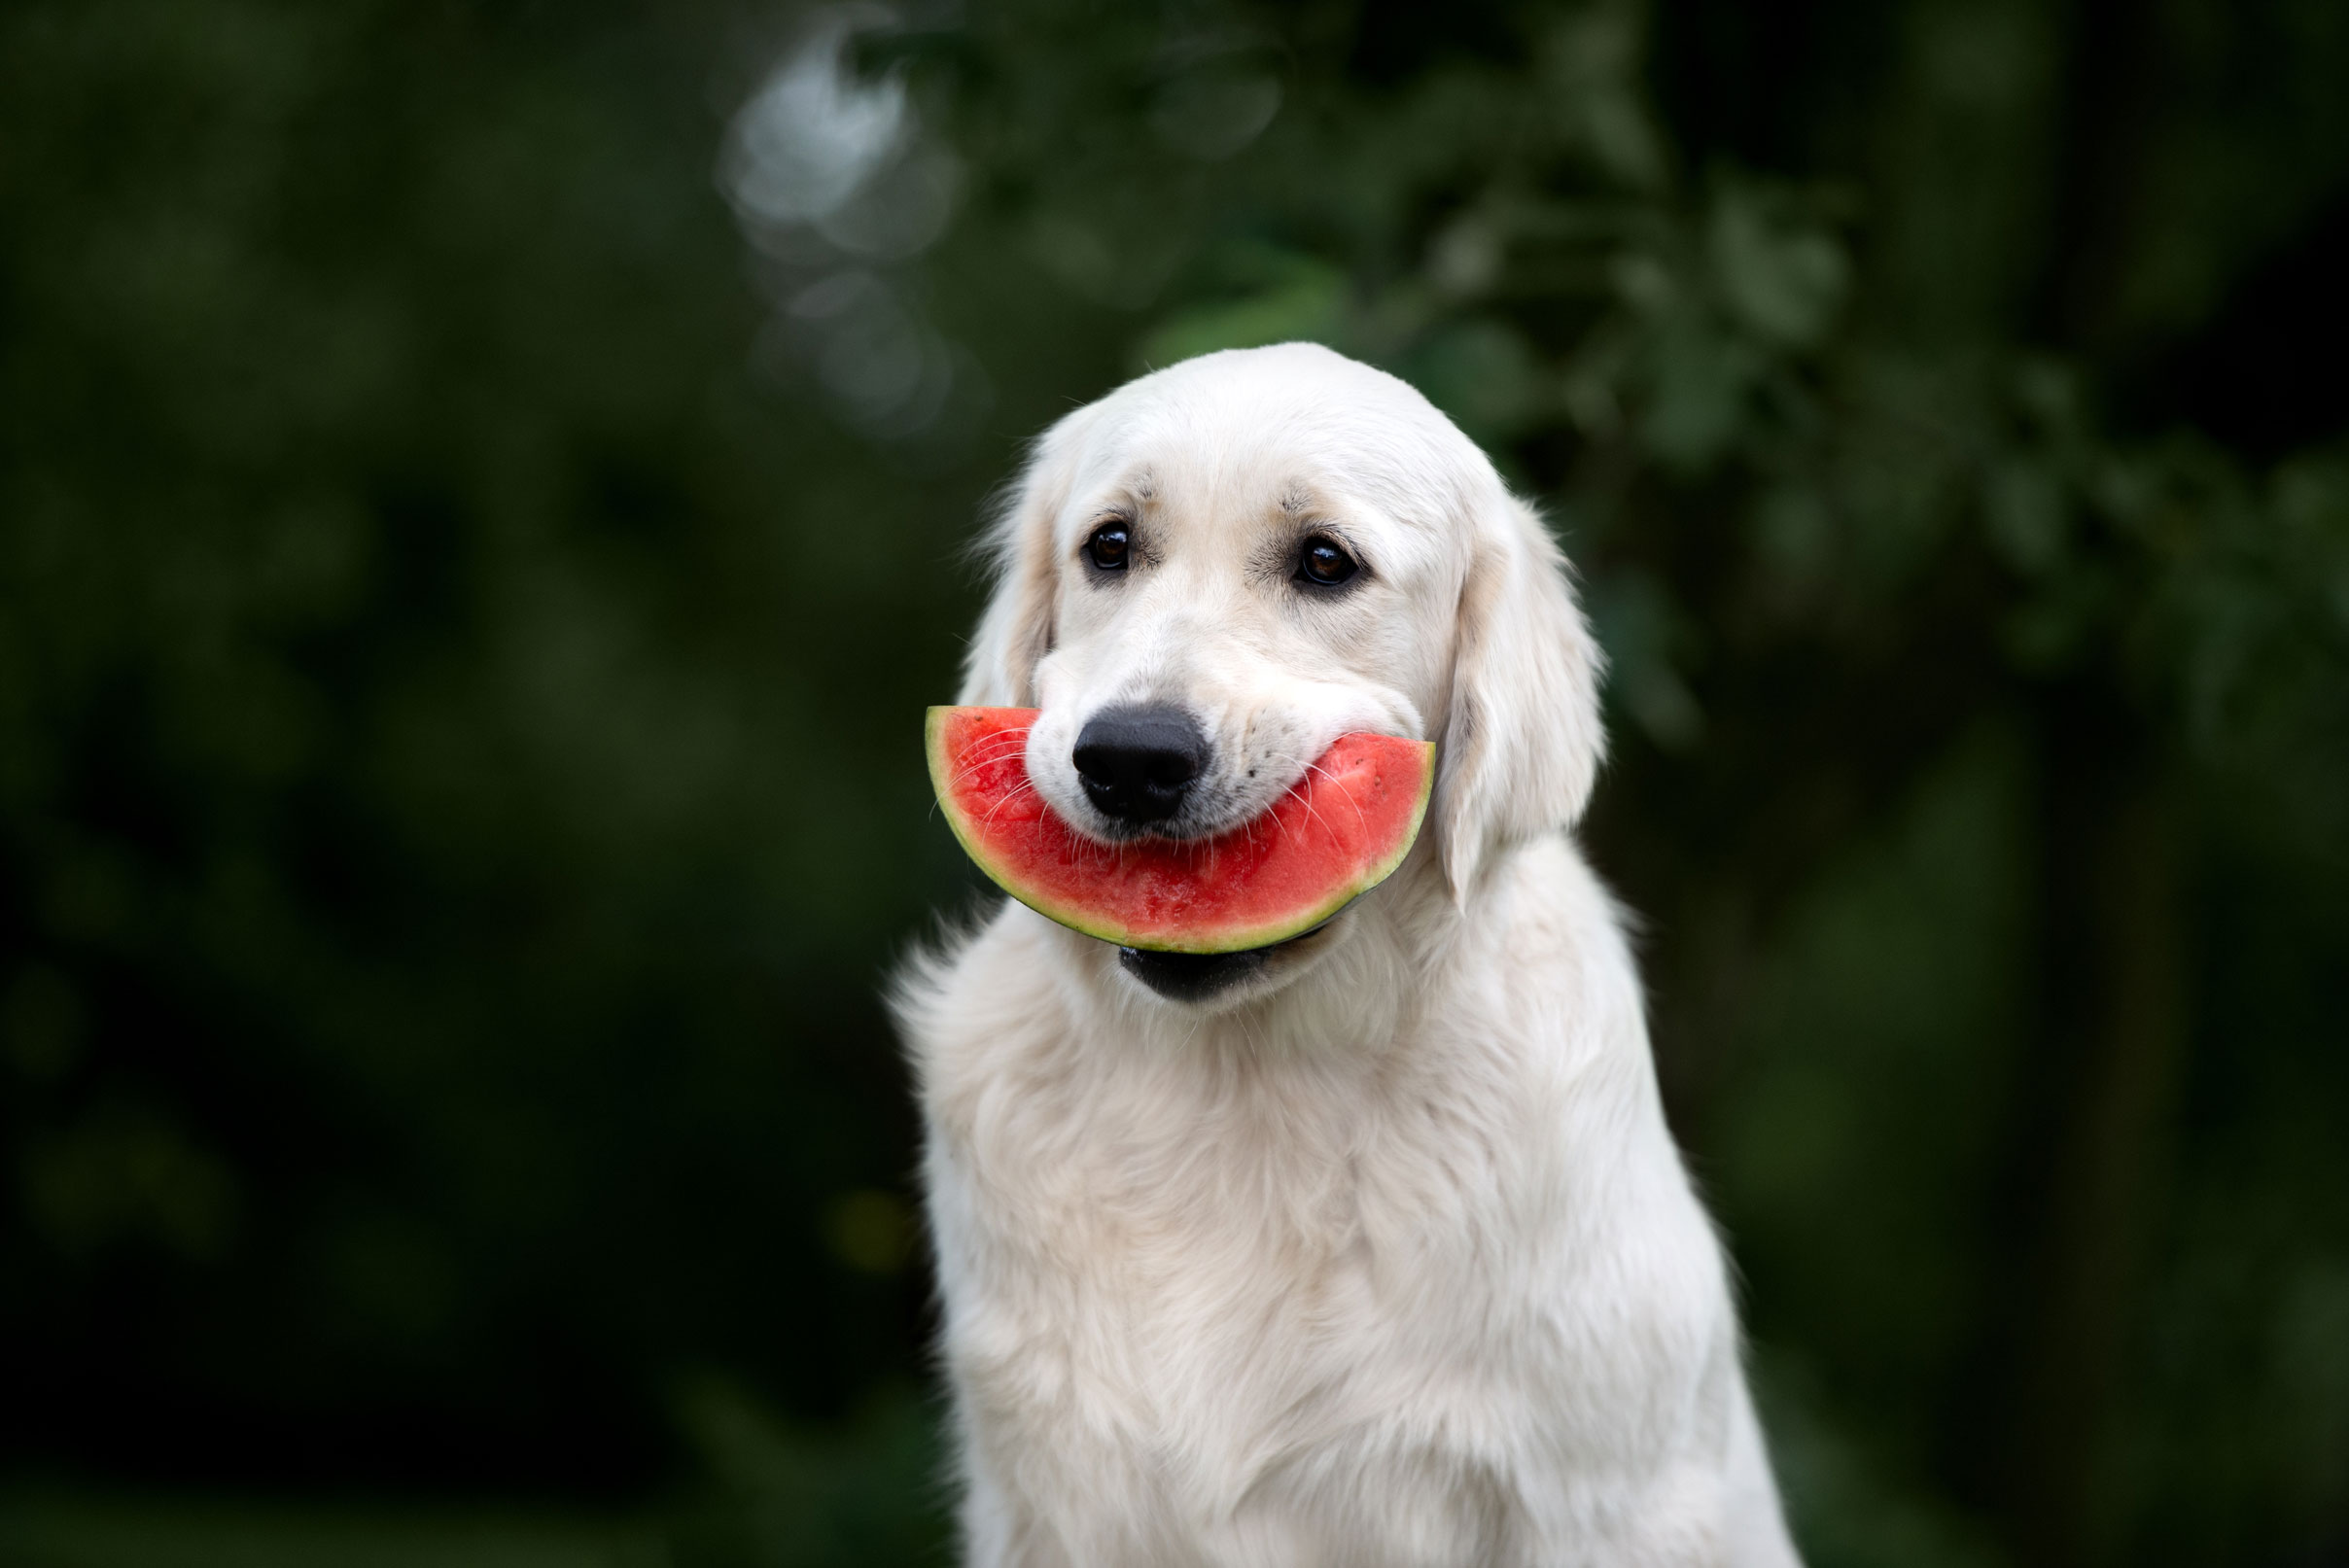 Summer Foods That Are Safe For Dogs